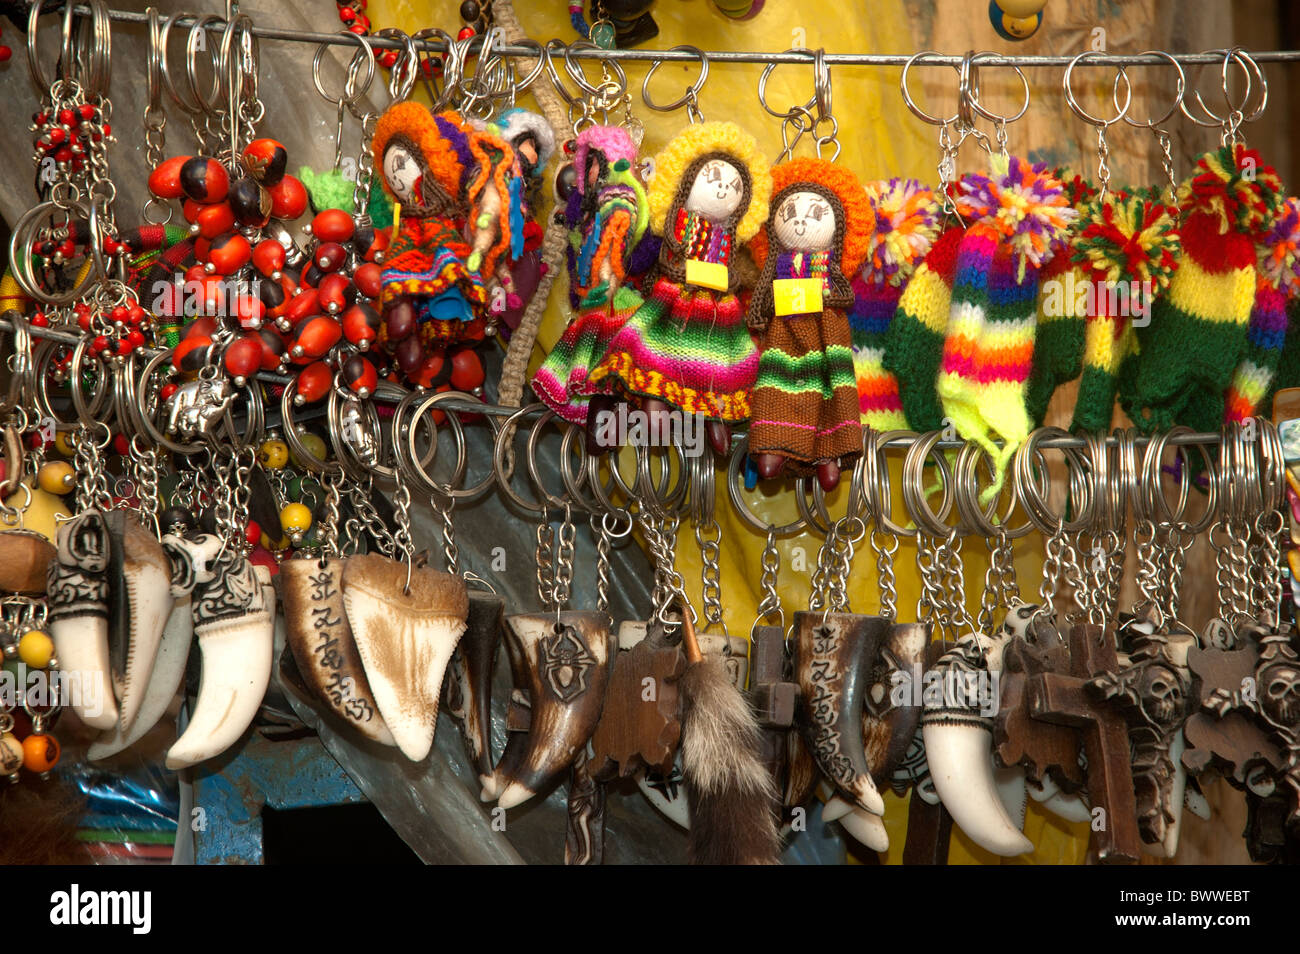 All sorts of items for sale as talisman, amulets, magic, ritual and traditional medicine in the Witches Market, La Paz, Bolivia. Stock Photo